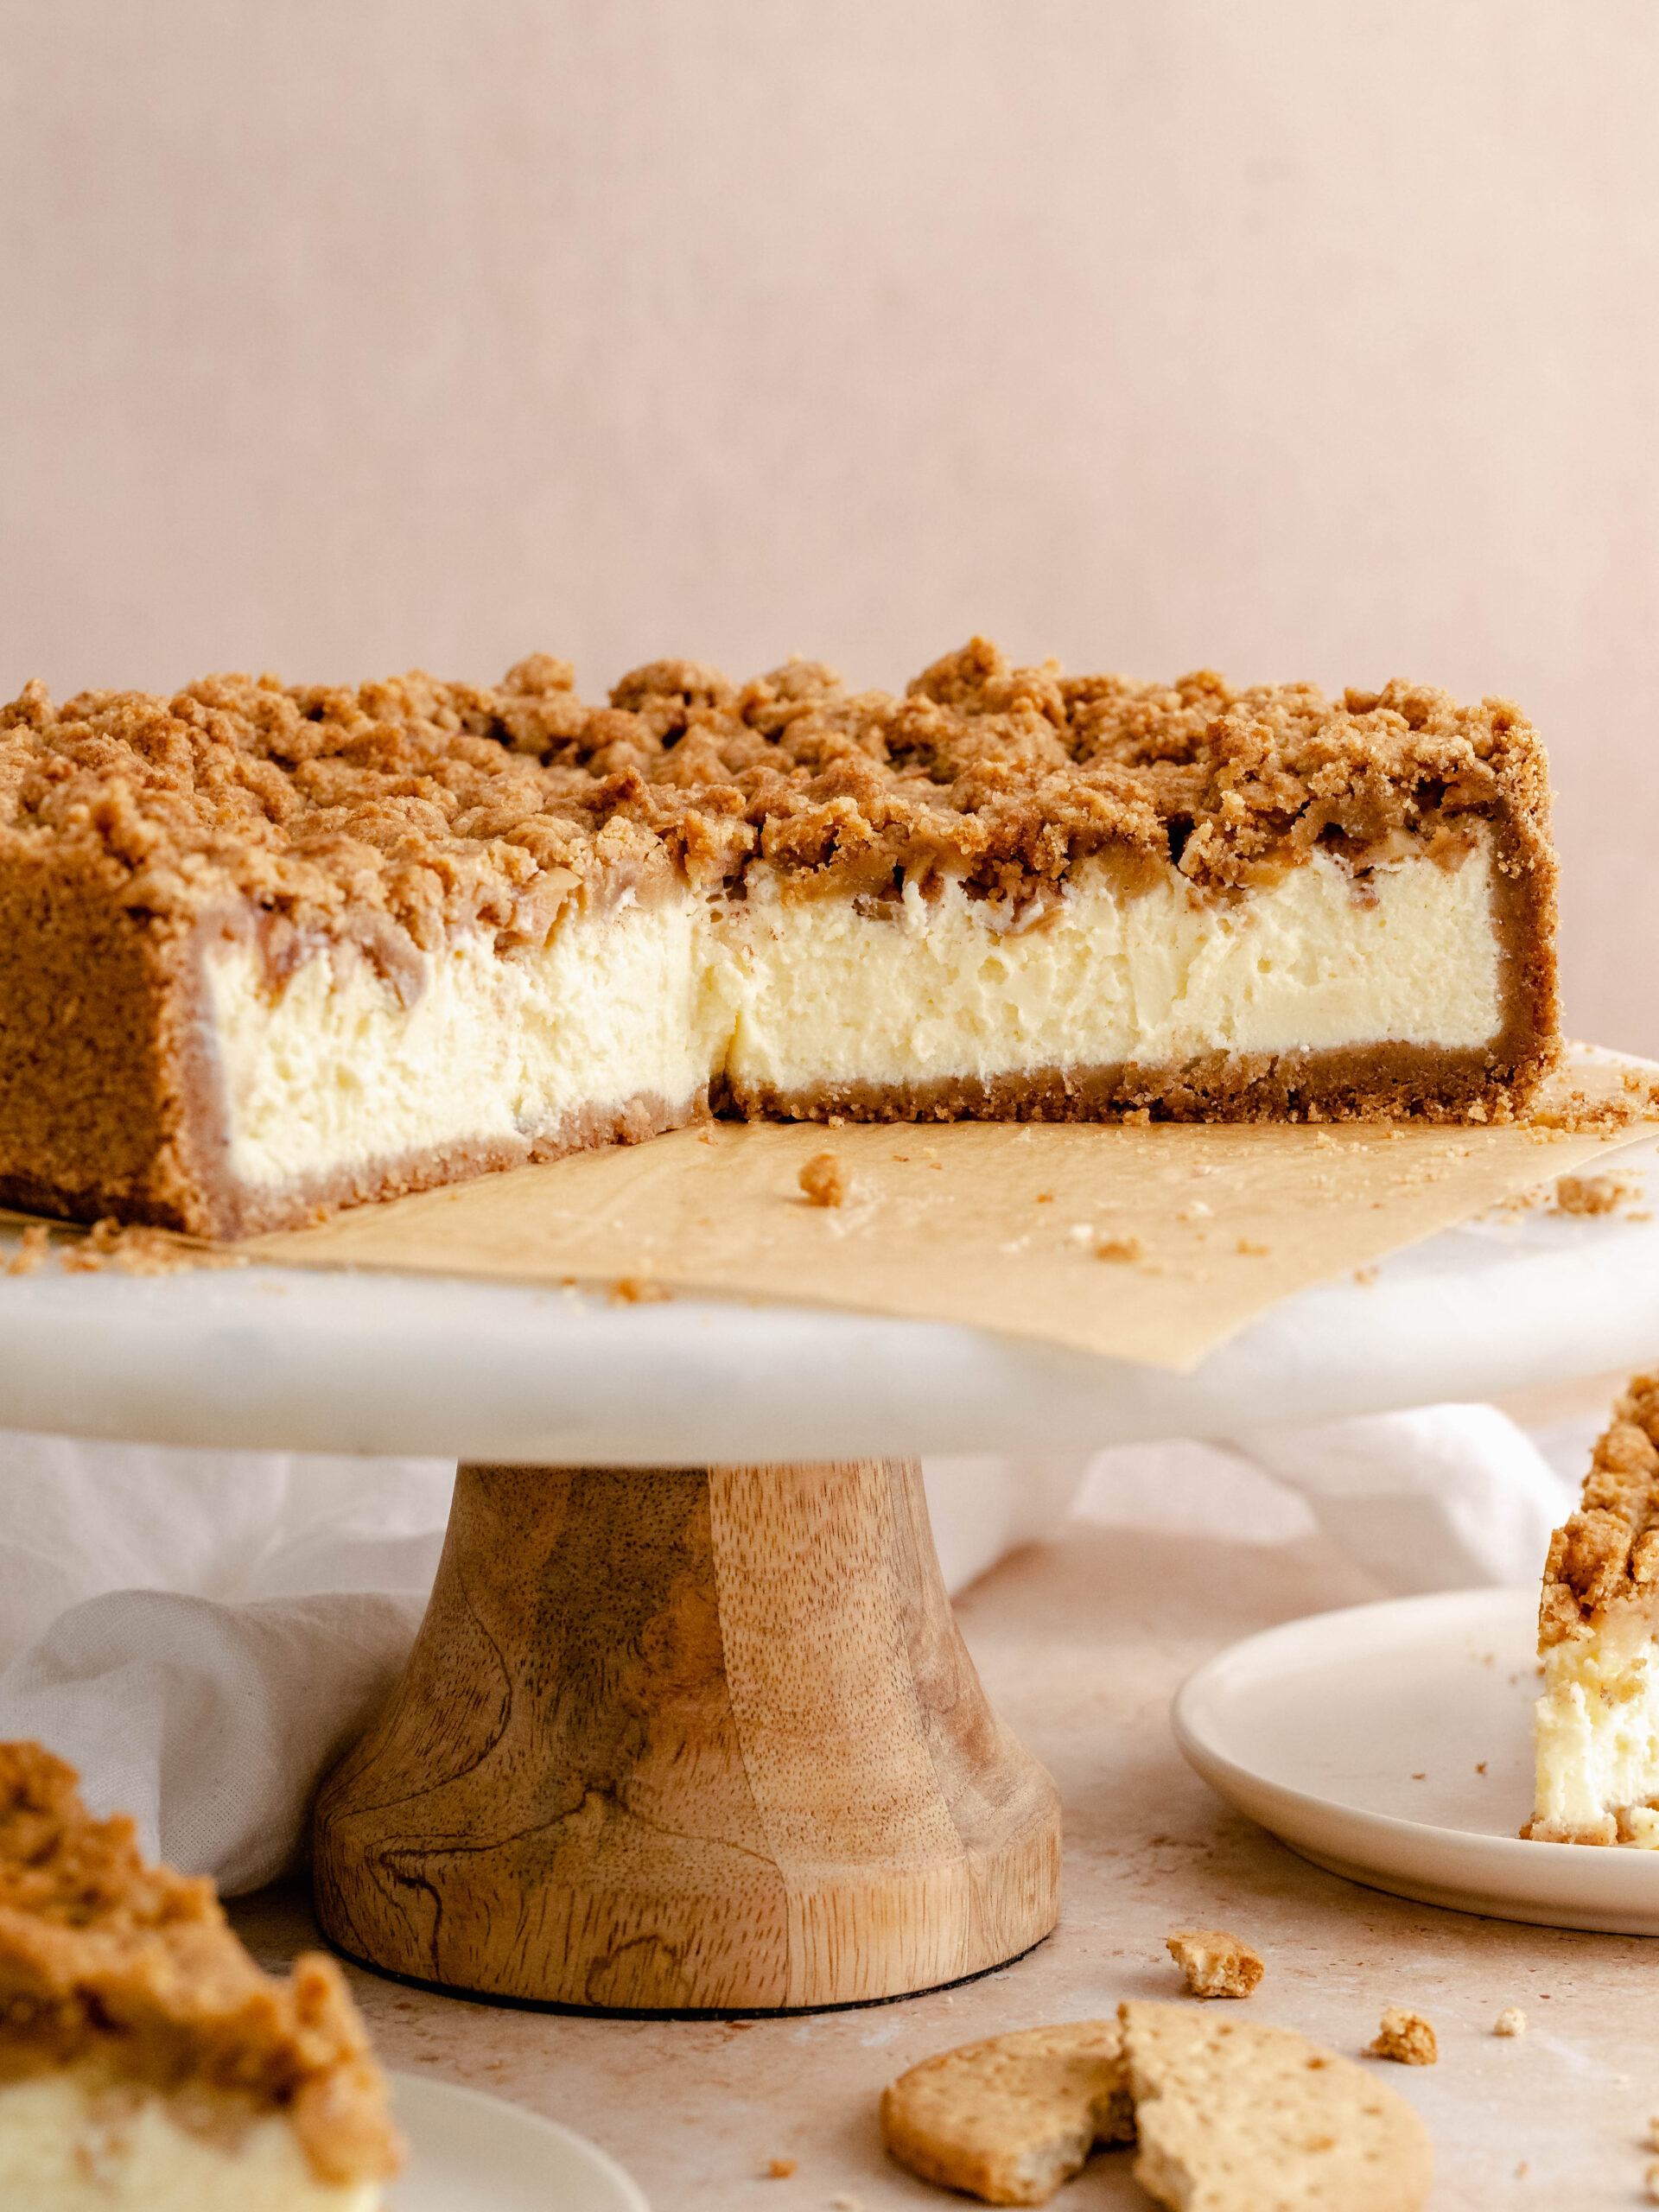 Apple crumble cheesecake on a cake stand.